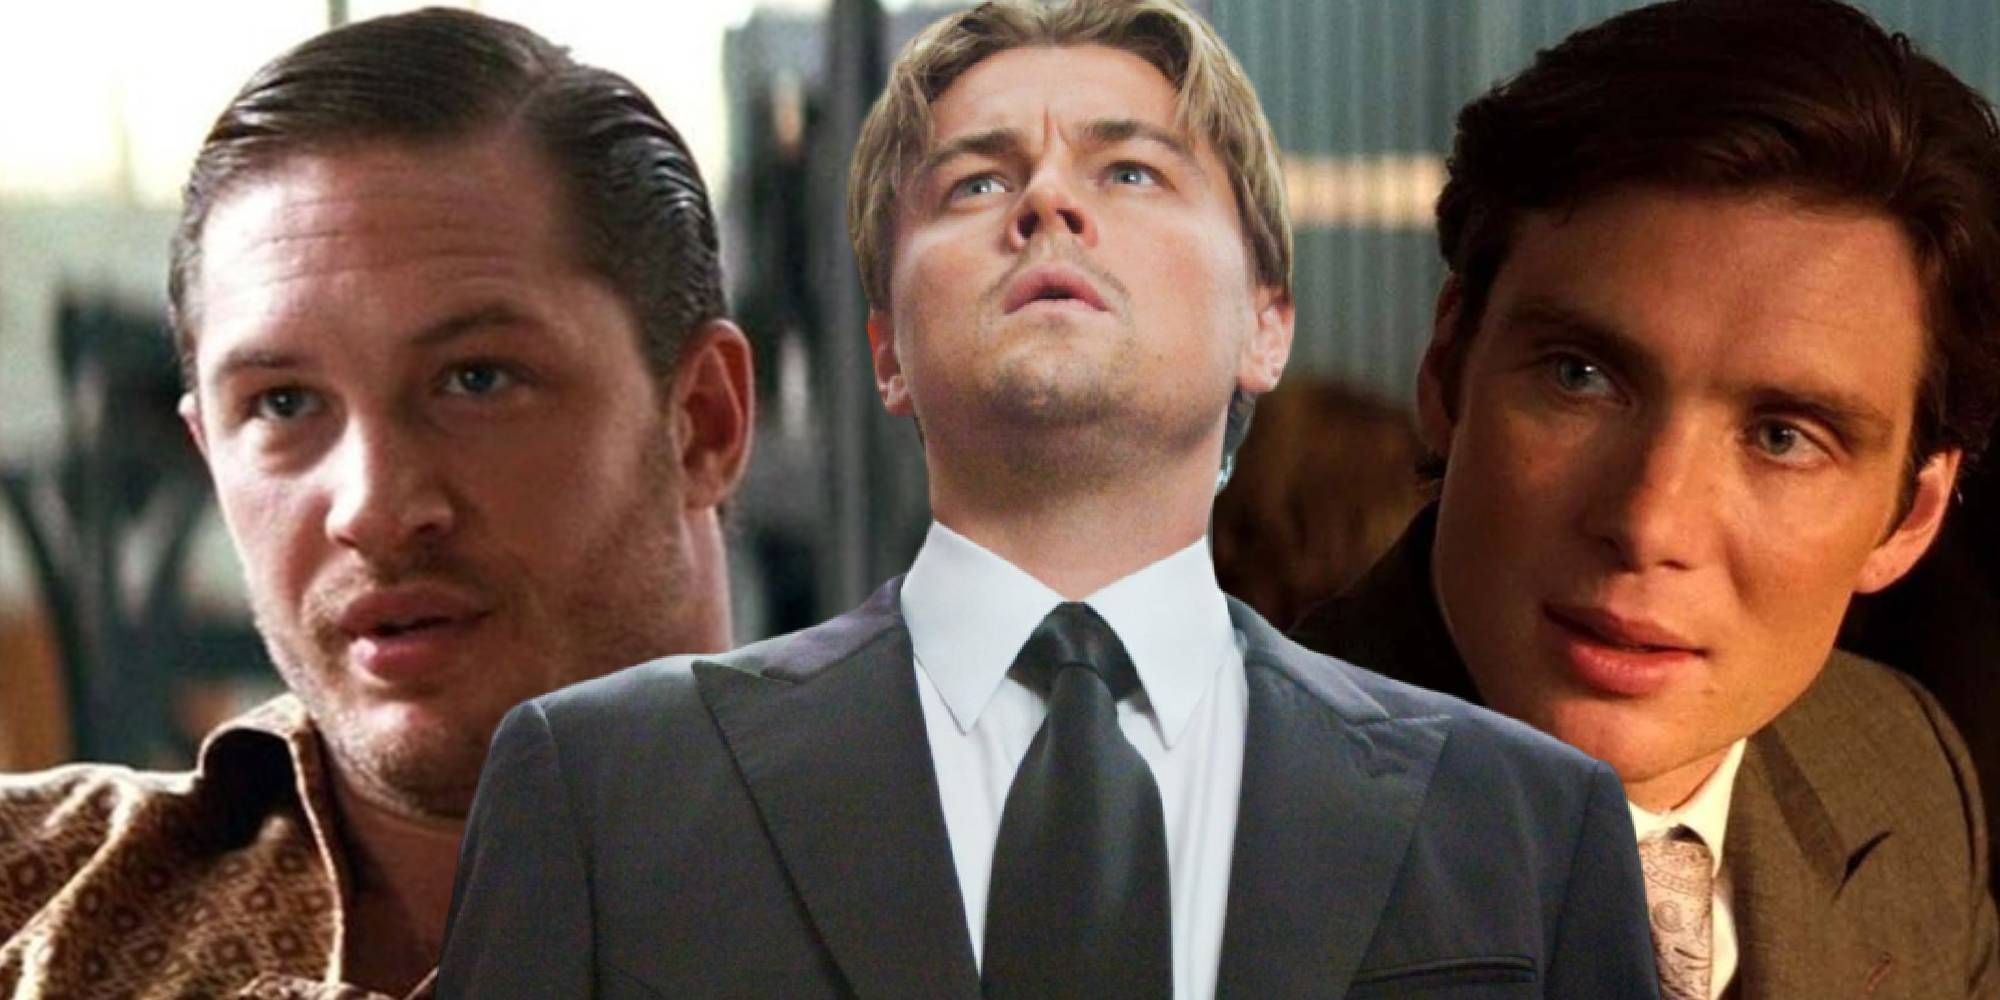 Where To Watch Inception